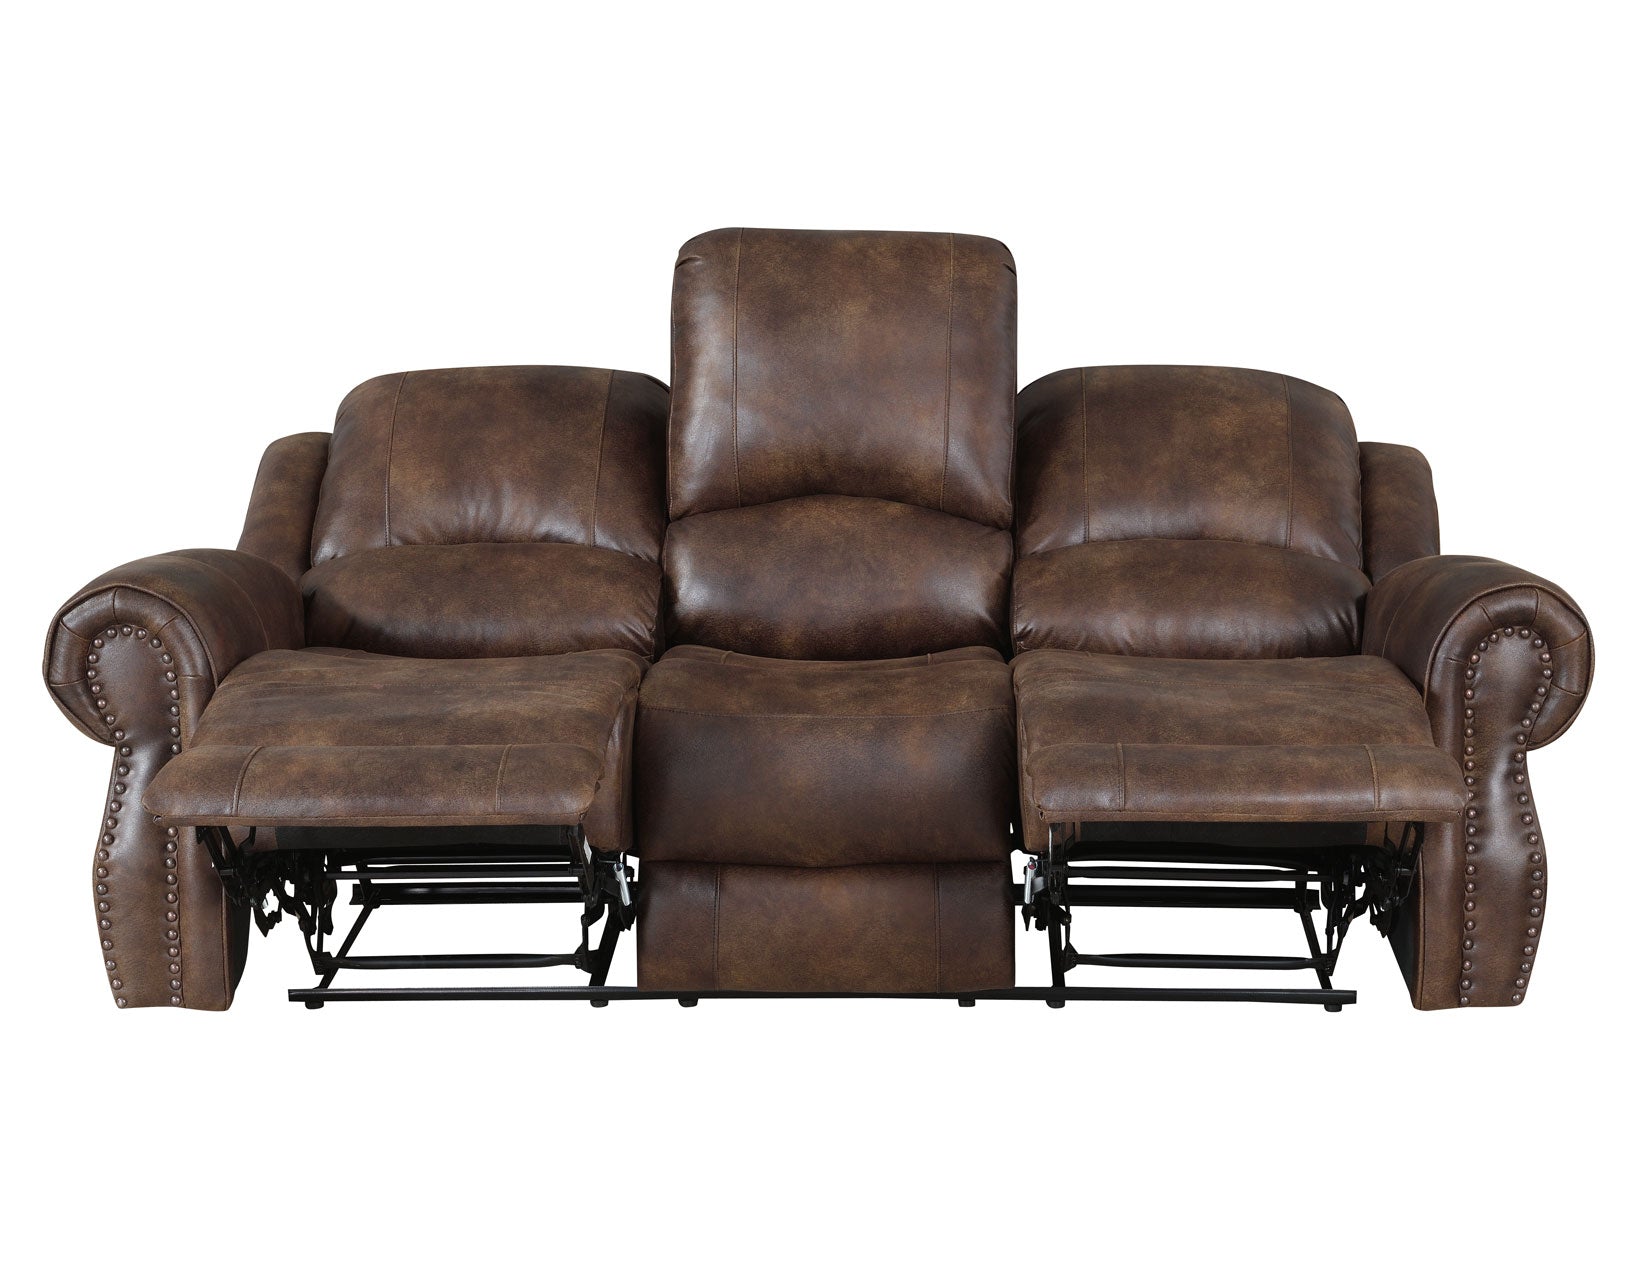 Navarro 3-Piece Manual Motion Set (Sofa, Console Loveseat and Recliner) by Steve Silver